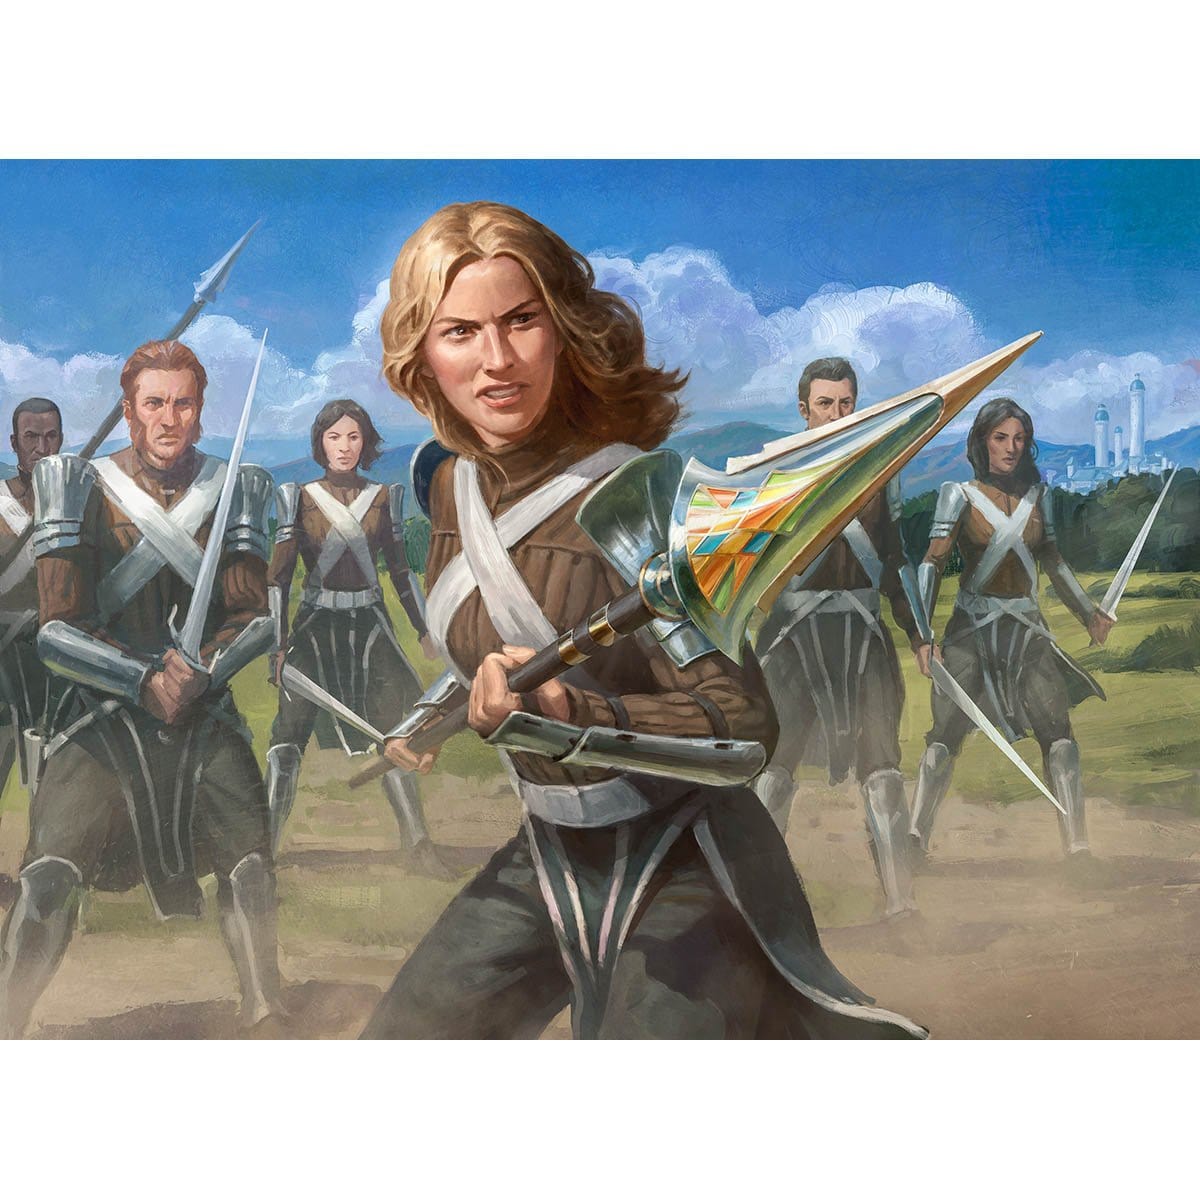 Squad Captain Print - Print - Original Magic Art - Accessories for Magic the Gathering and other card games